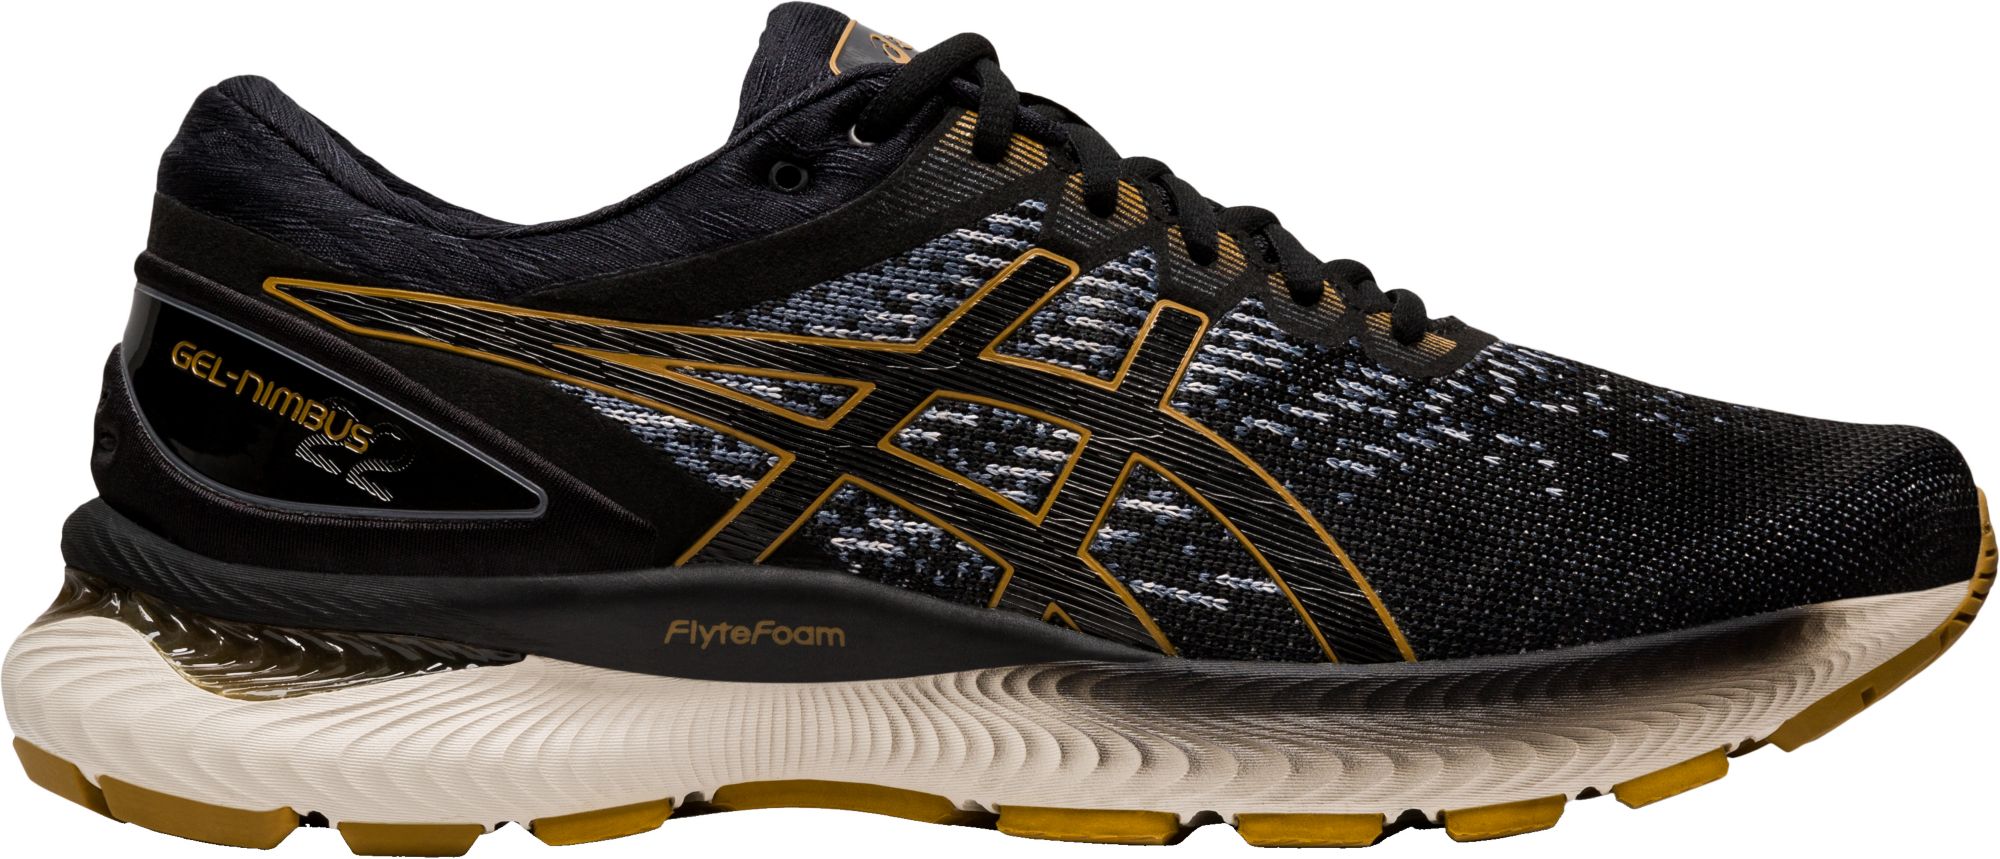 ASICS GEL-Nimbus Running Shoes | Curbside Pickup Available at DICK'S